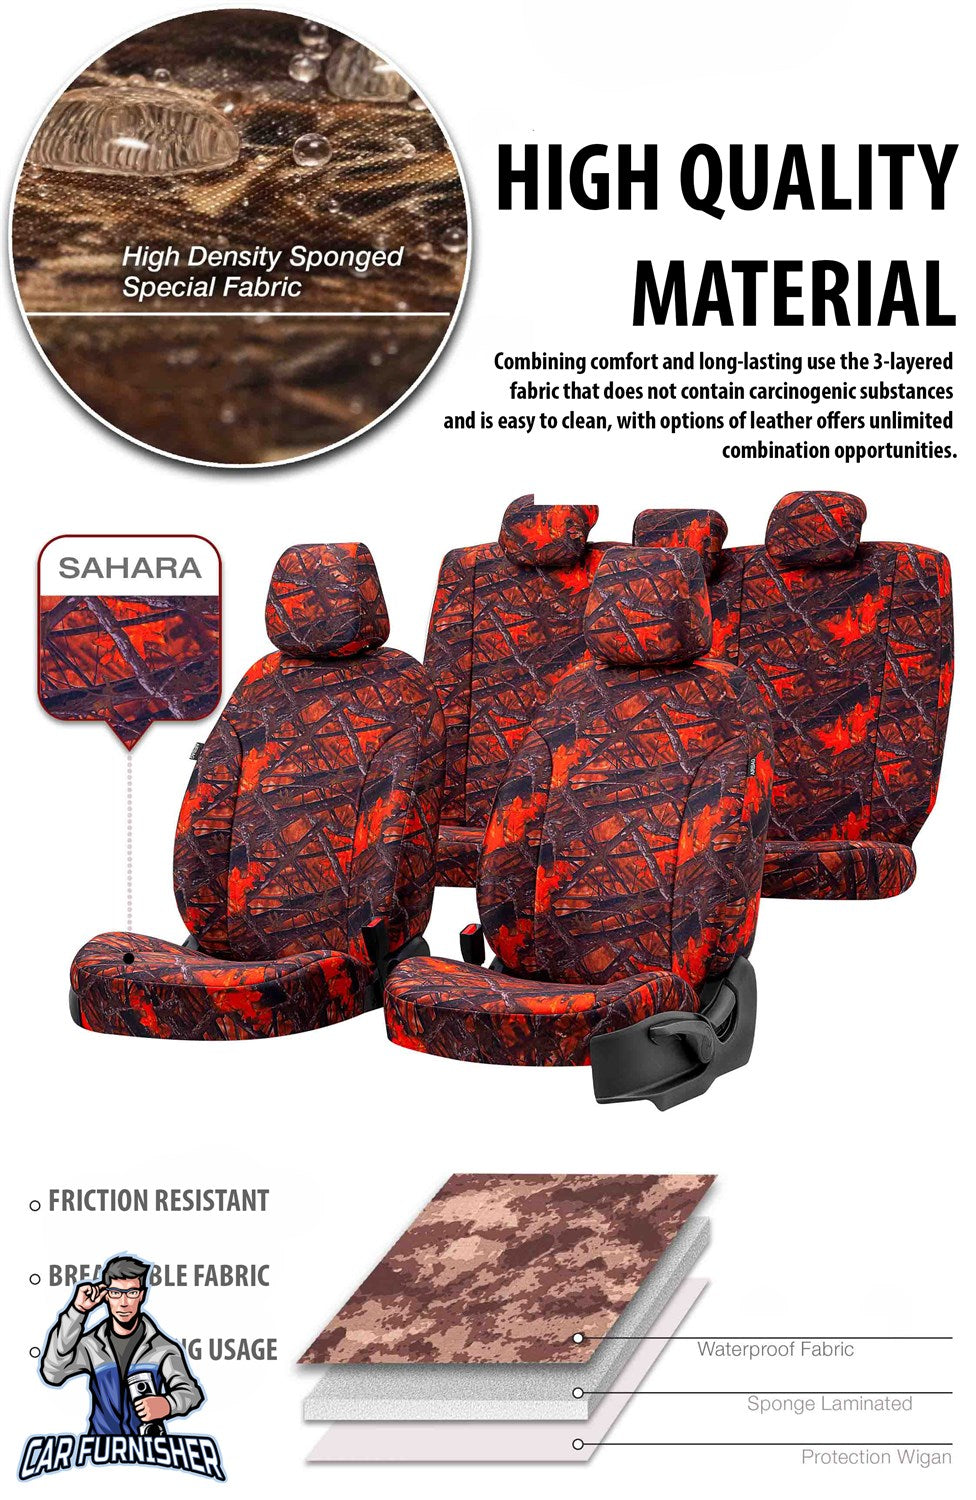 Ford Fusion Seat Covers Camouflage Waterproof Design Alps Camo Waterproof Fabric